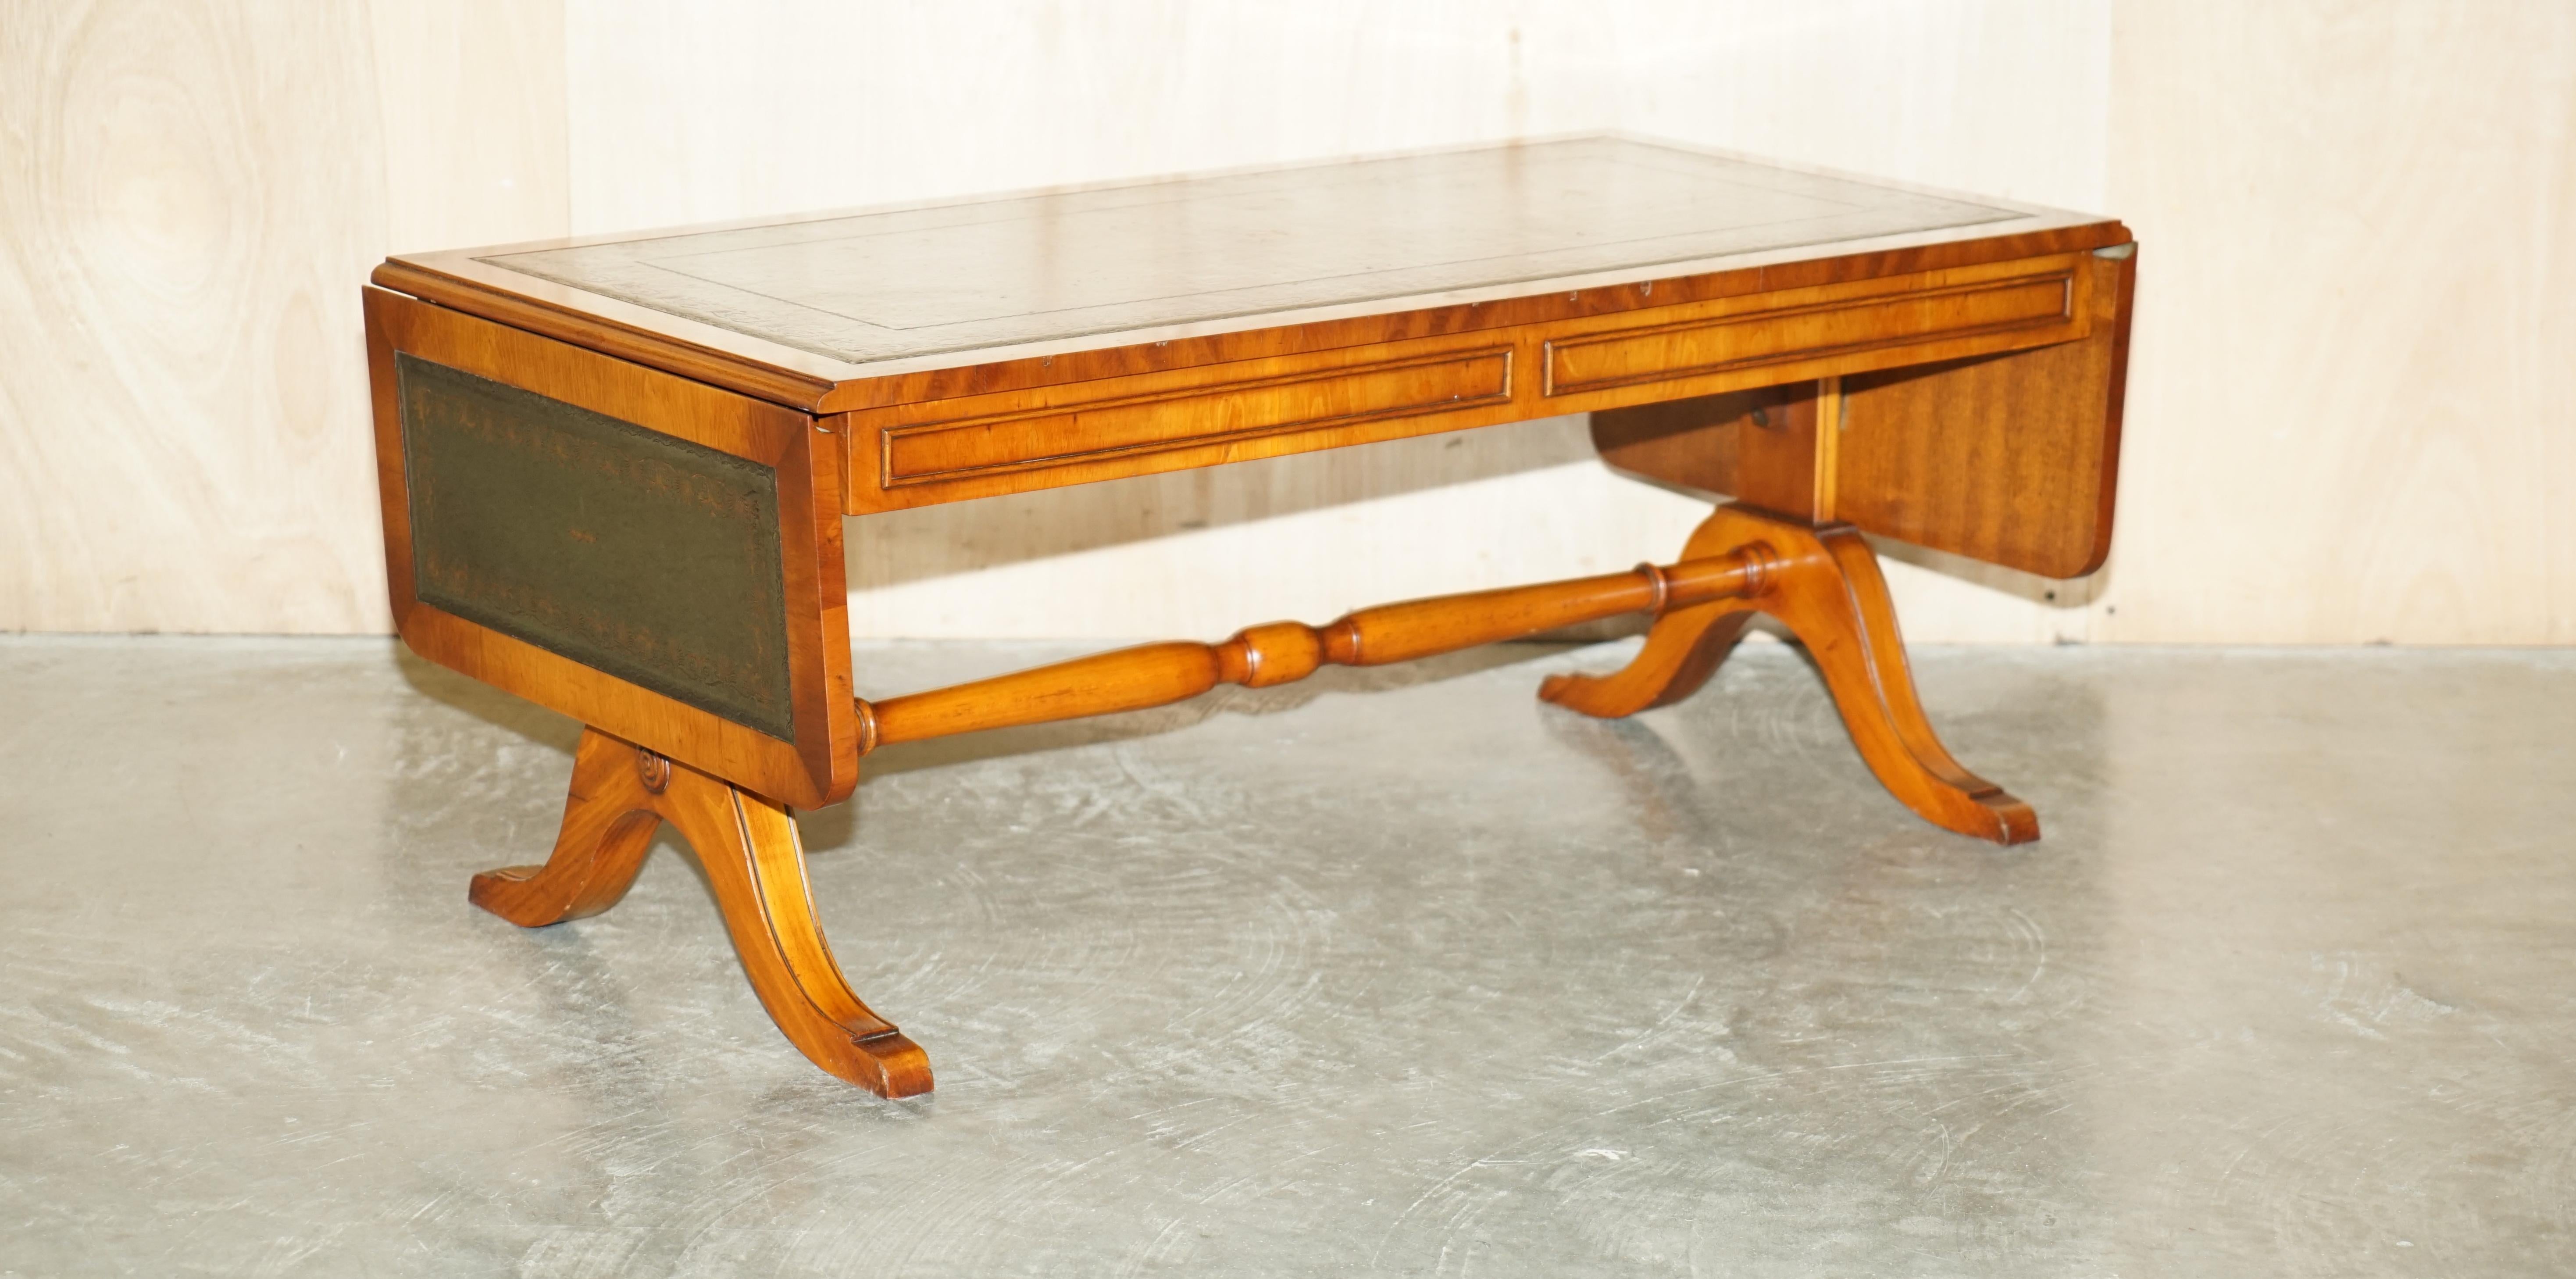 We are delighted to offer for sale this lovely condition Bevan Funnell yew wood green leather large extending coffee table.

This is a very well made and versatile piece with a lovely timber patina and stunning Regency style green leather